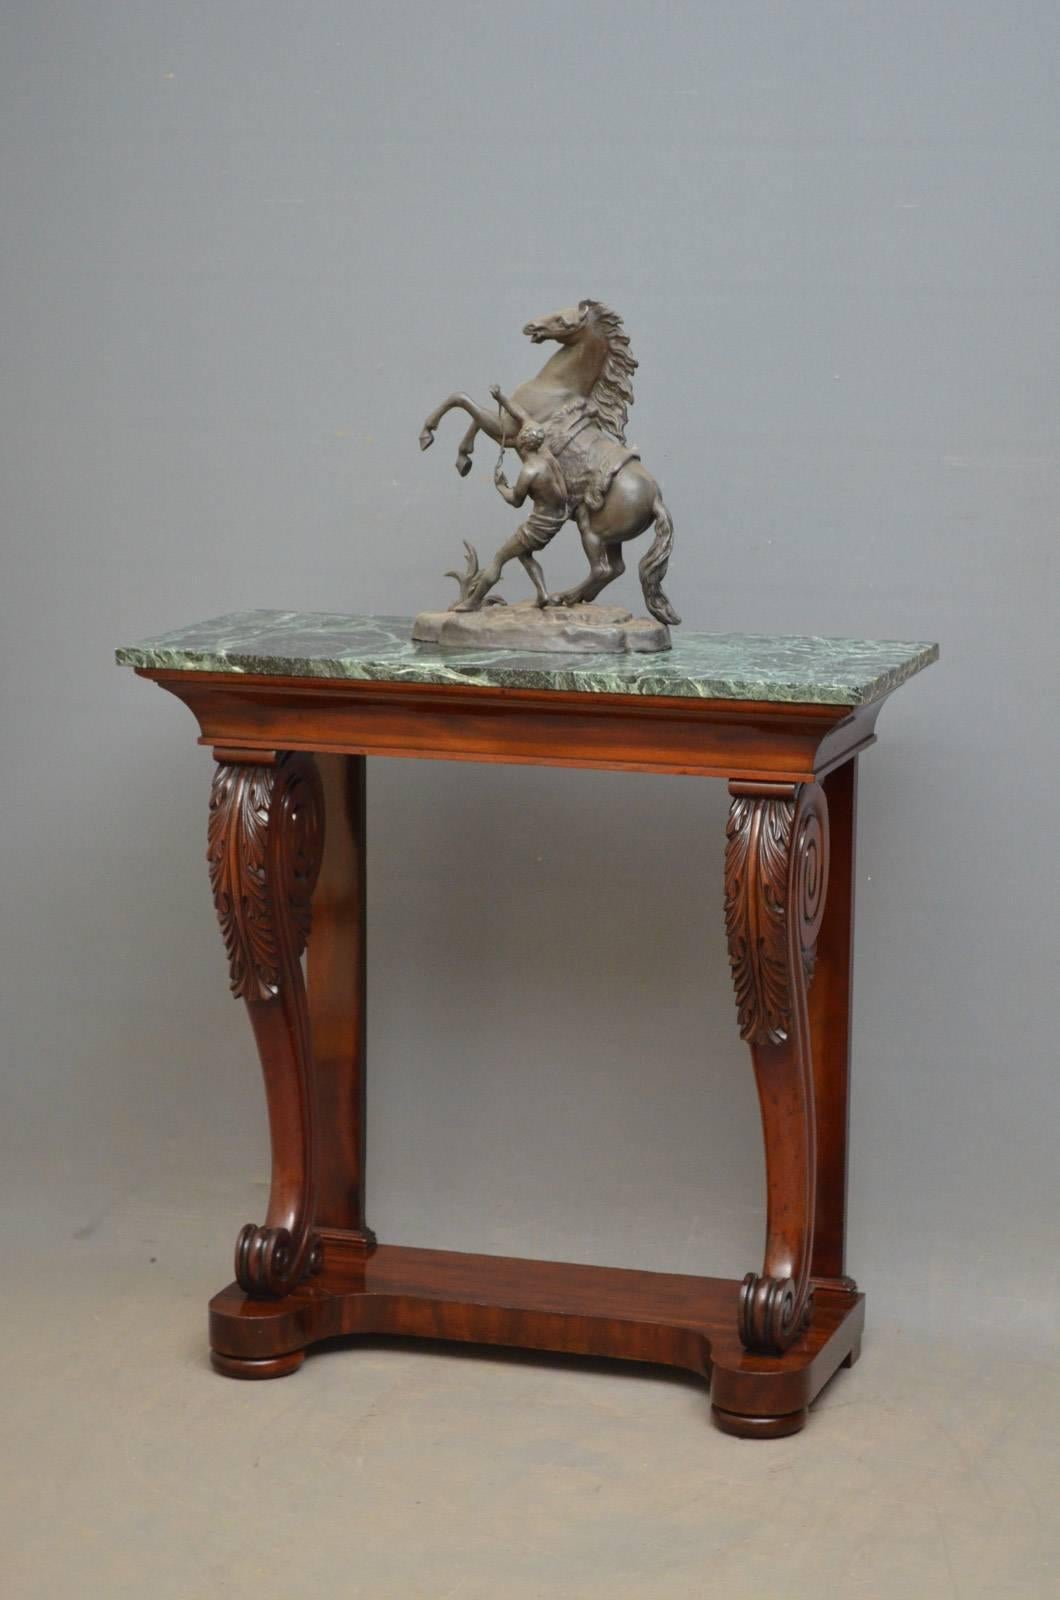 Sn4265, fine William IV hall table in mahogany, having stunning veined green marble top above concave frieze raised on beautifully carved legs terminating in shaped base and bun feet. This antique mahogany hall table retains its original finish,